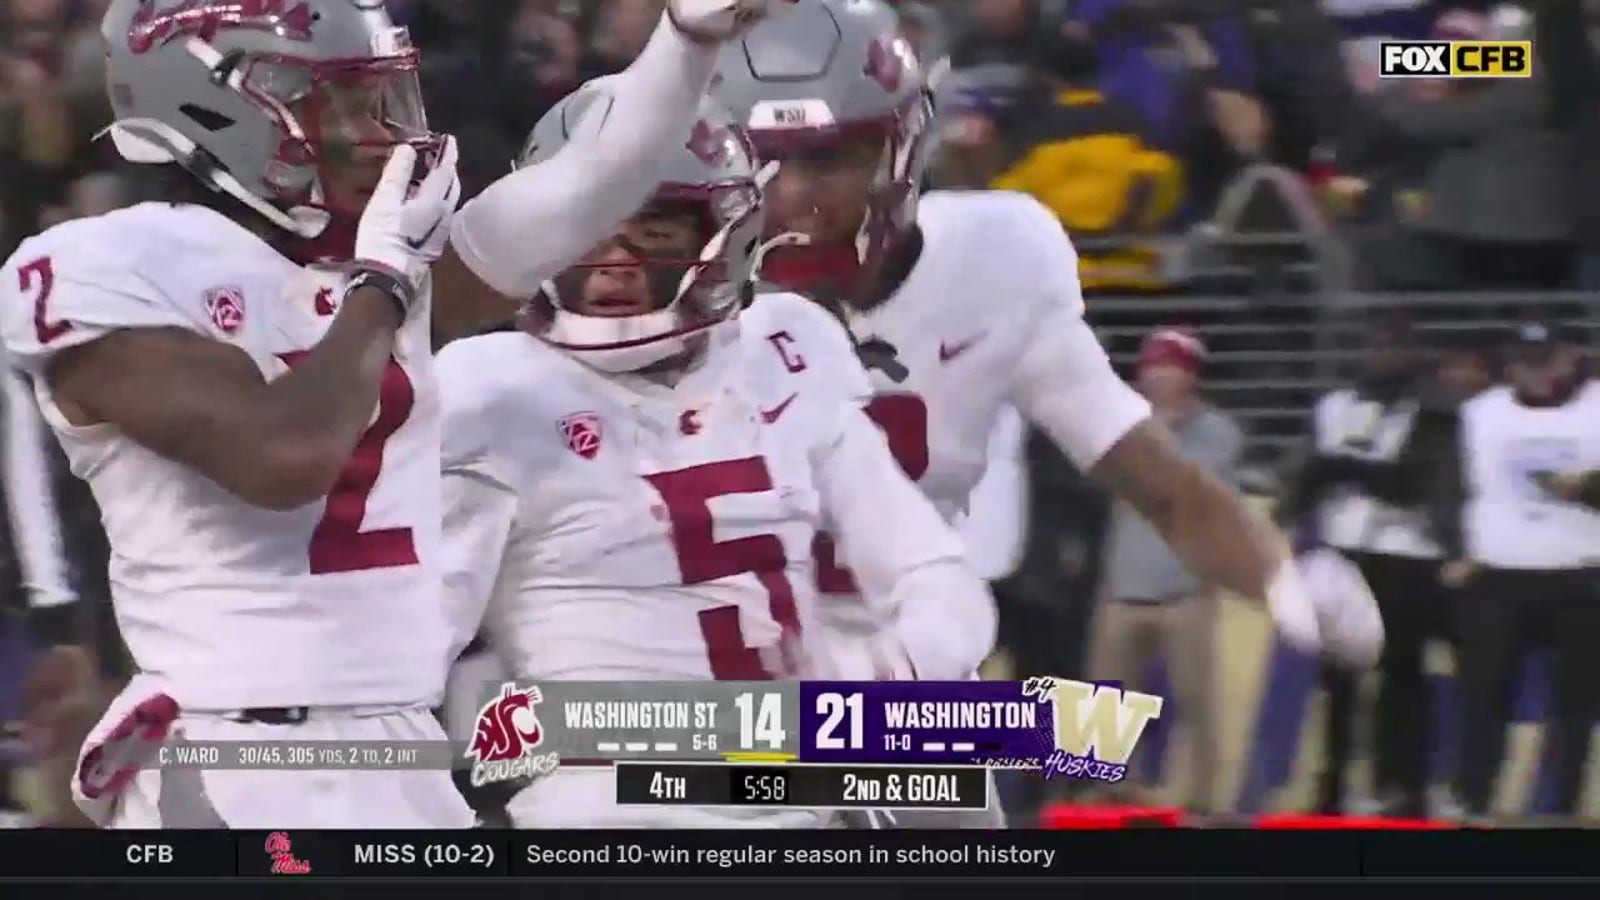 Washington State's Cameron Ward finds Lincoln Victor for an eight-yard TD to tie the game vs. Washington